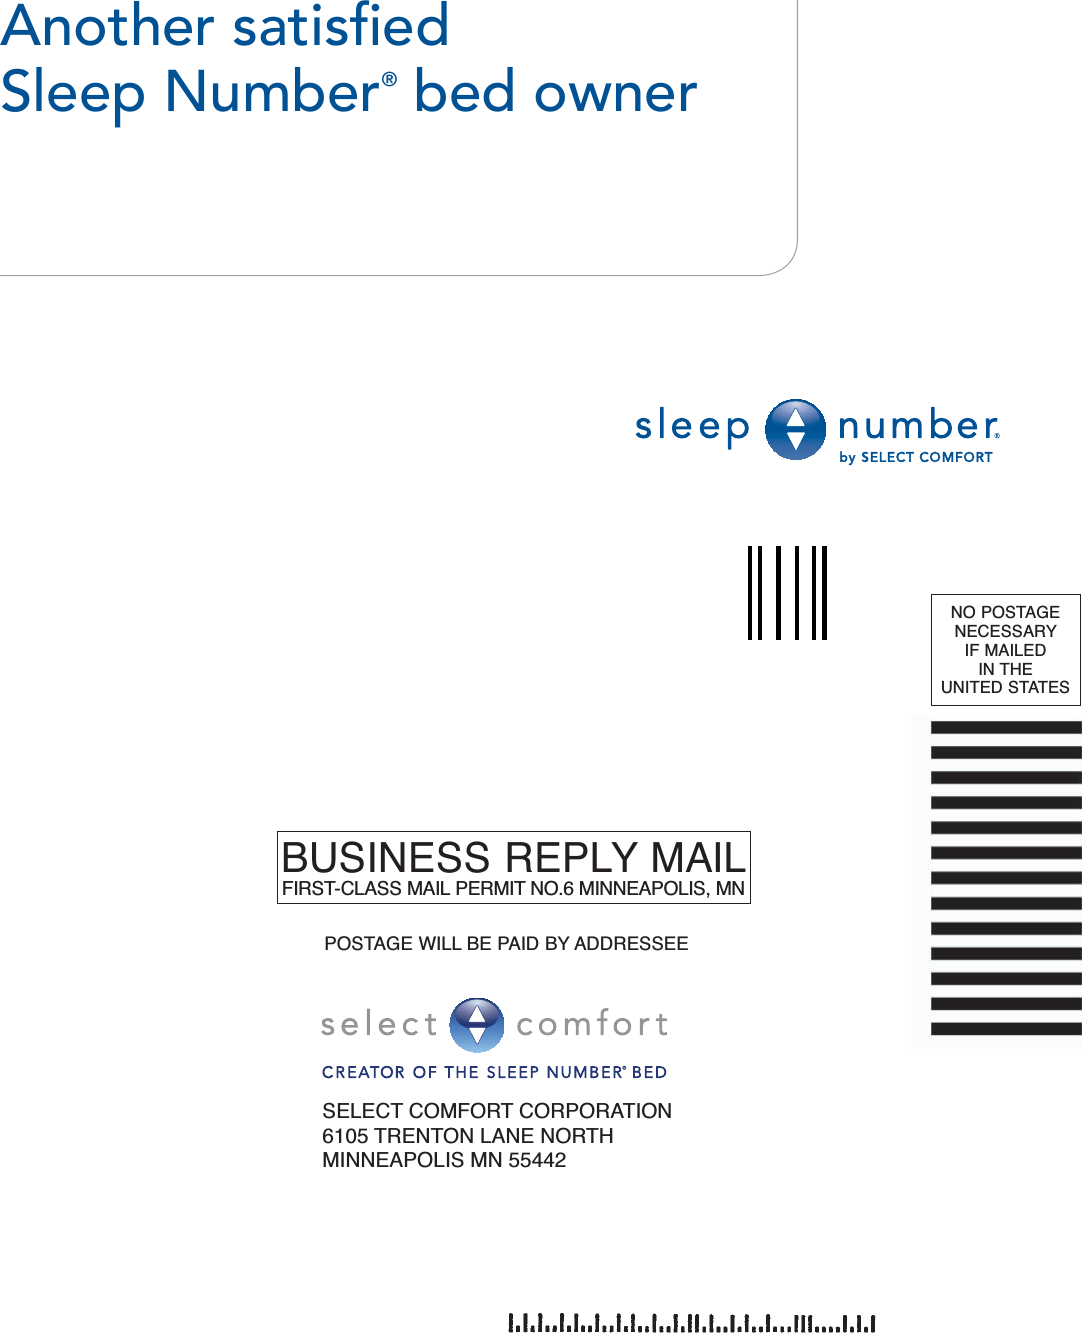 Another satisﬁ ed Sleep Number® bed ownerSELECT COMFORT CORPORATION6105 TRENTON LANE NORTHMINNEAPOLIS MN 55442BUSINESS REPLY MAILFIRST-CLASS MAIL PERMIT NO.6 MINNEAPOLIS, MNNO POSTAGE NECESSARY IF MAILED IN THE UNITED STATESPOSTAGE WILL BE PAID BY ADDRESSEE